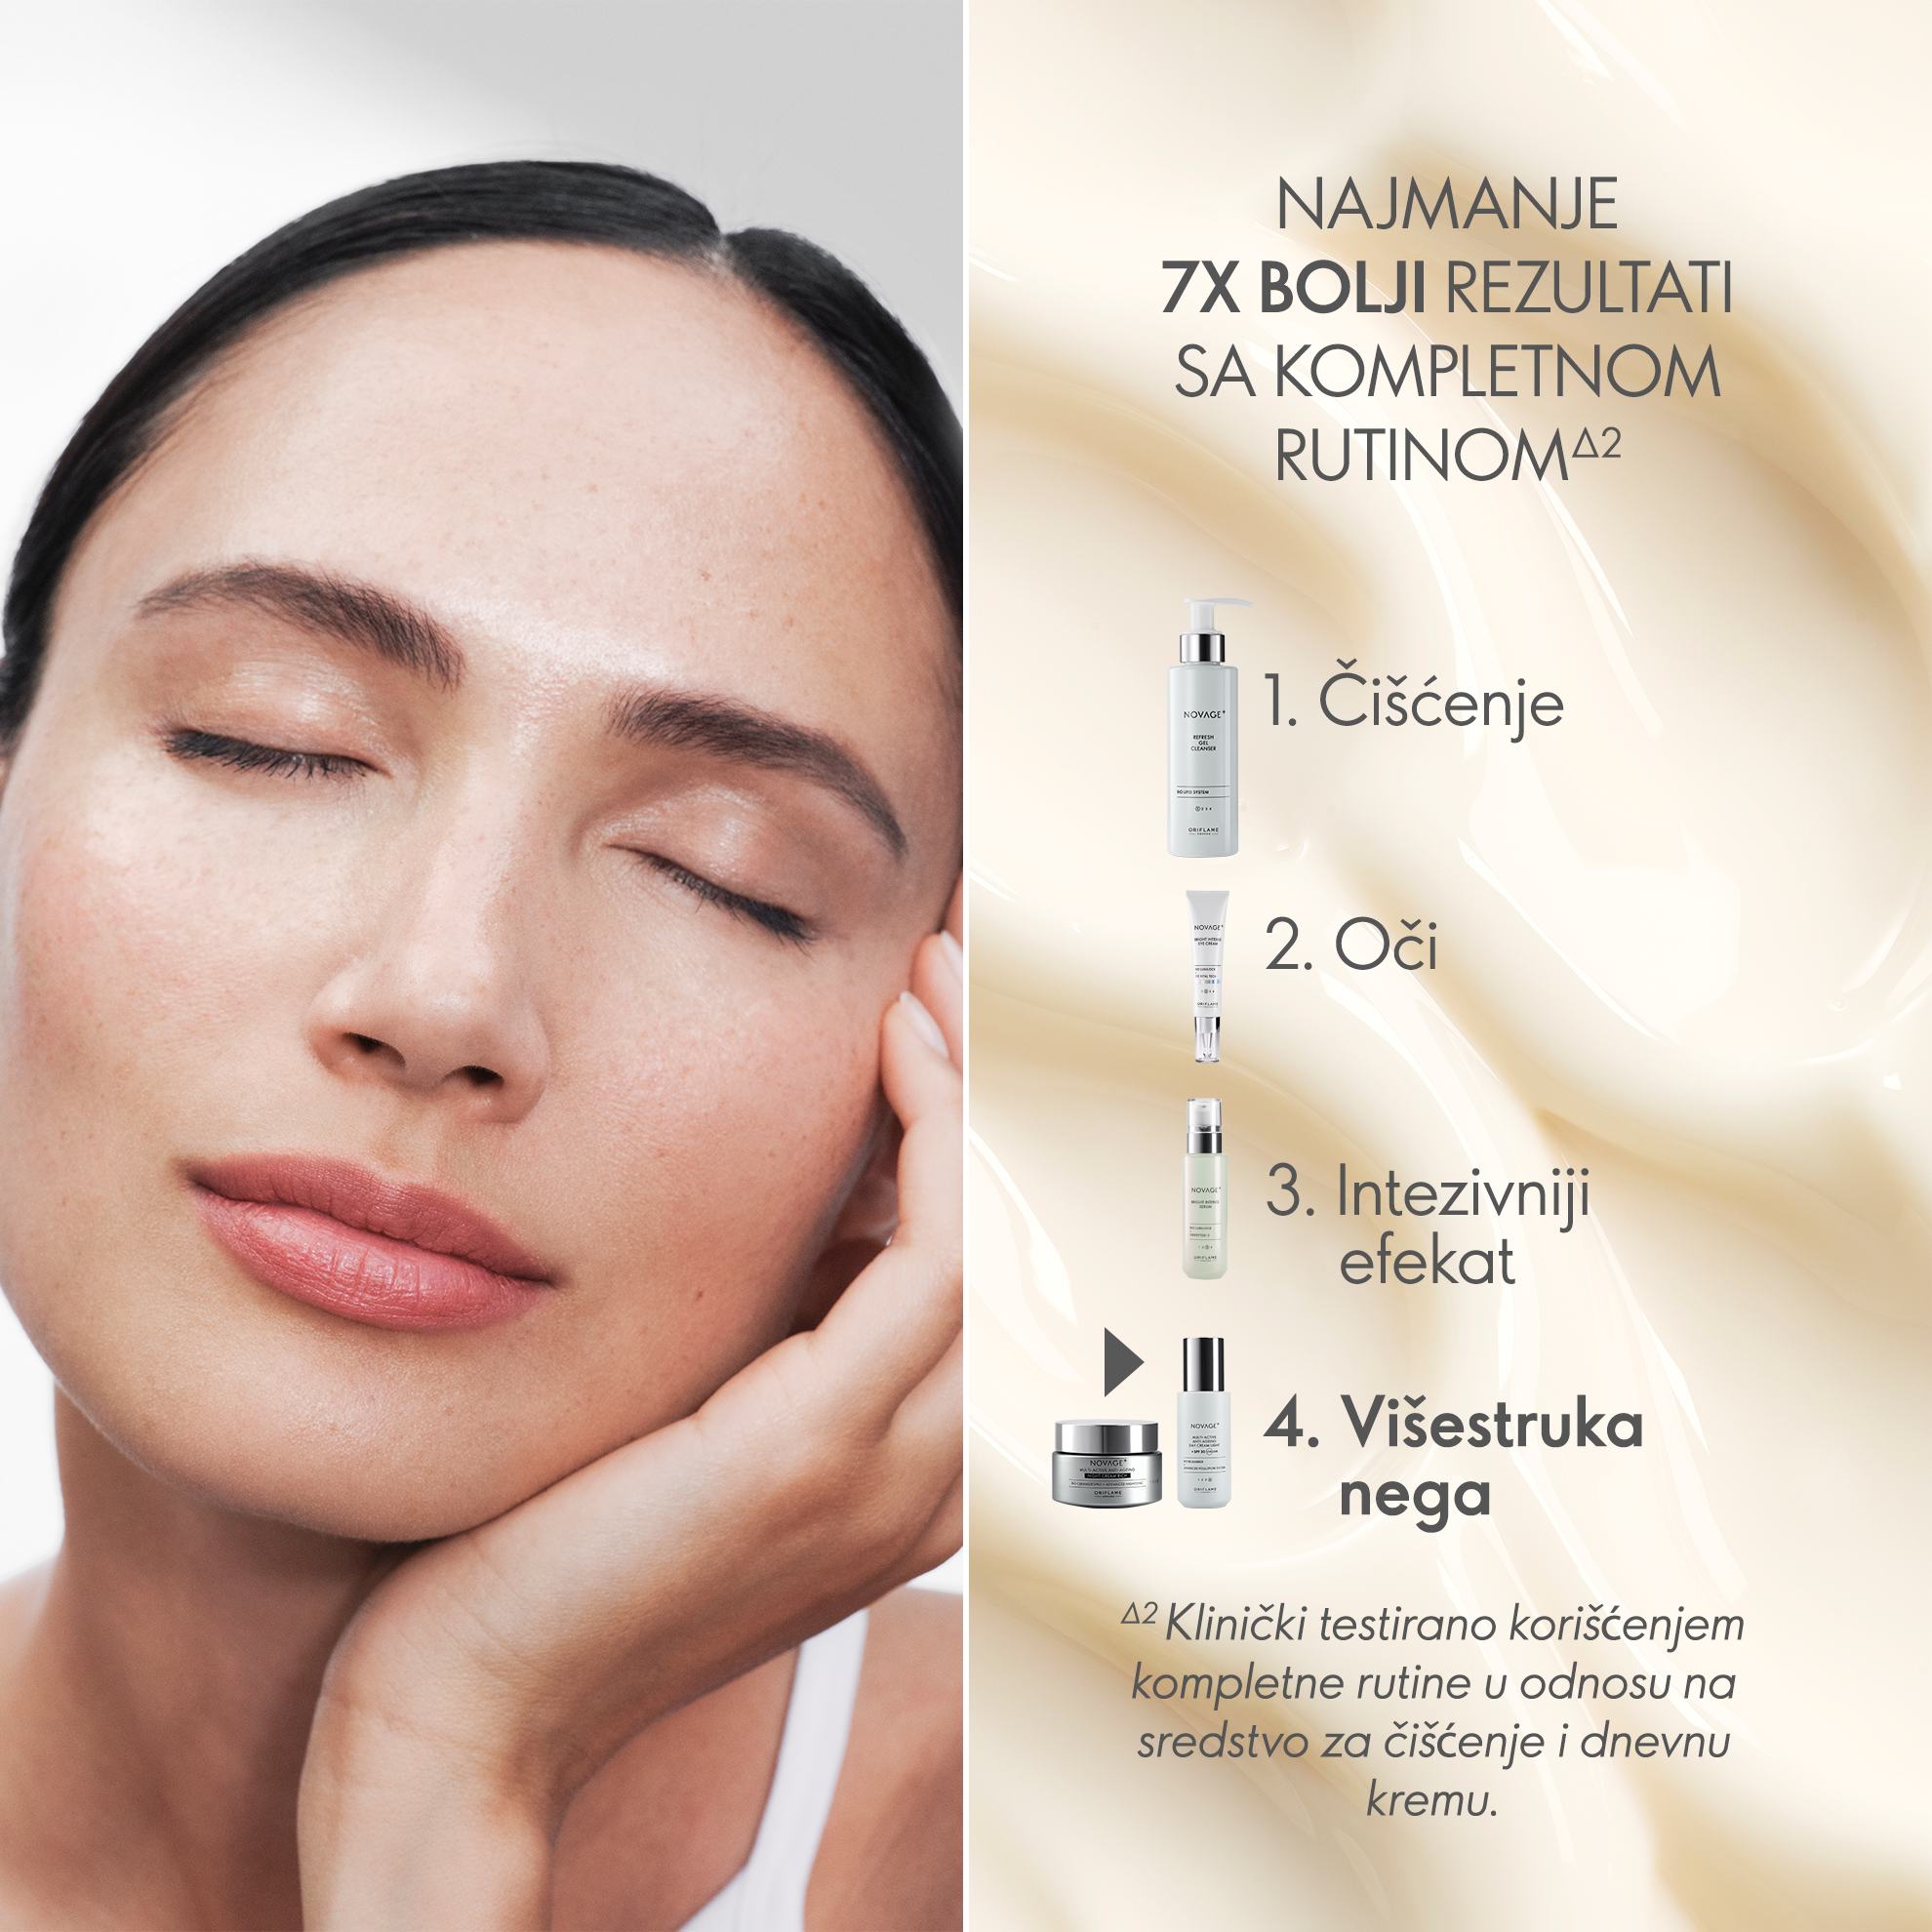 https://media-cdn.oriflame.com/productImage?externalMediaId=product-management-media%2fProducts%2f41043%2fRS%2f41043_5.png&id=17551281&version=2